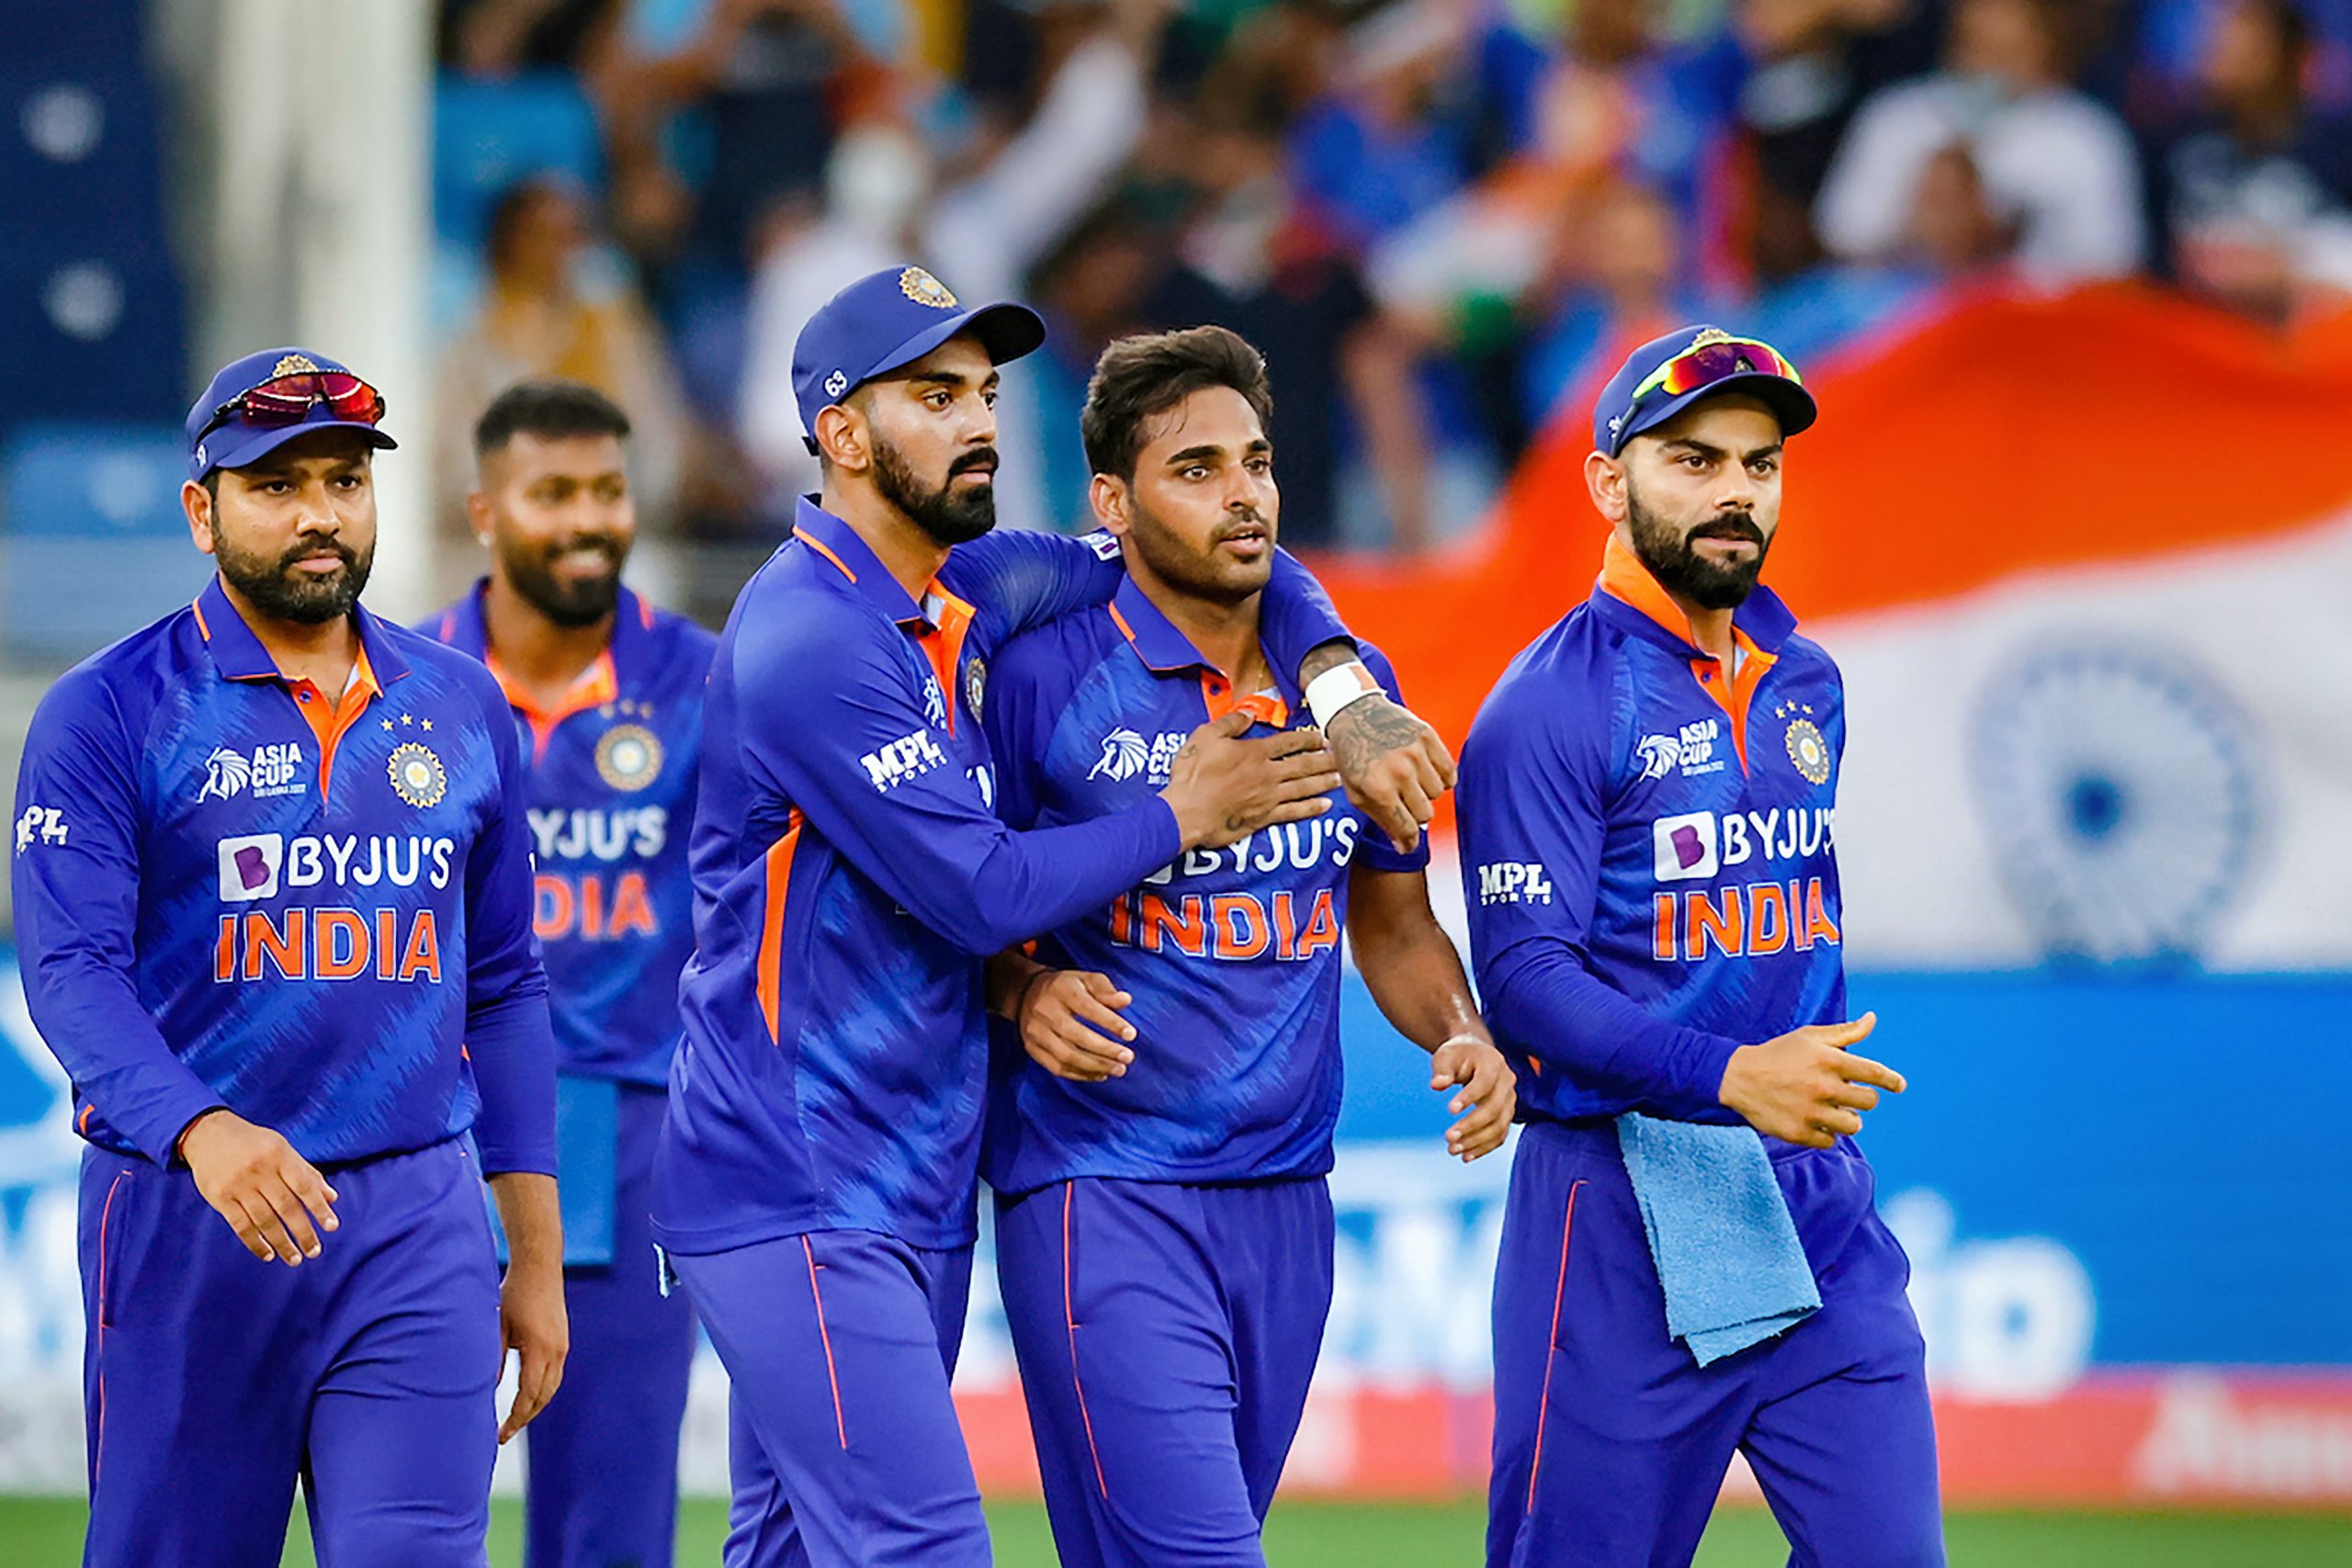 Asia Cup 2022: Bhuvneshwar Kumars 4/26 best figures by an Indian bowler against Pakistan